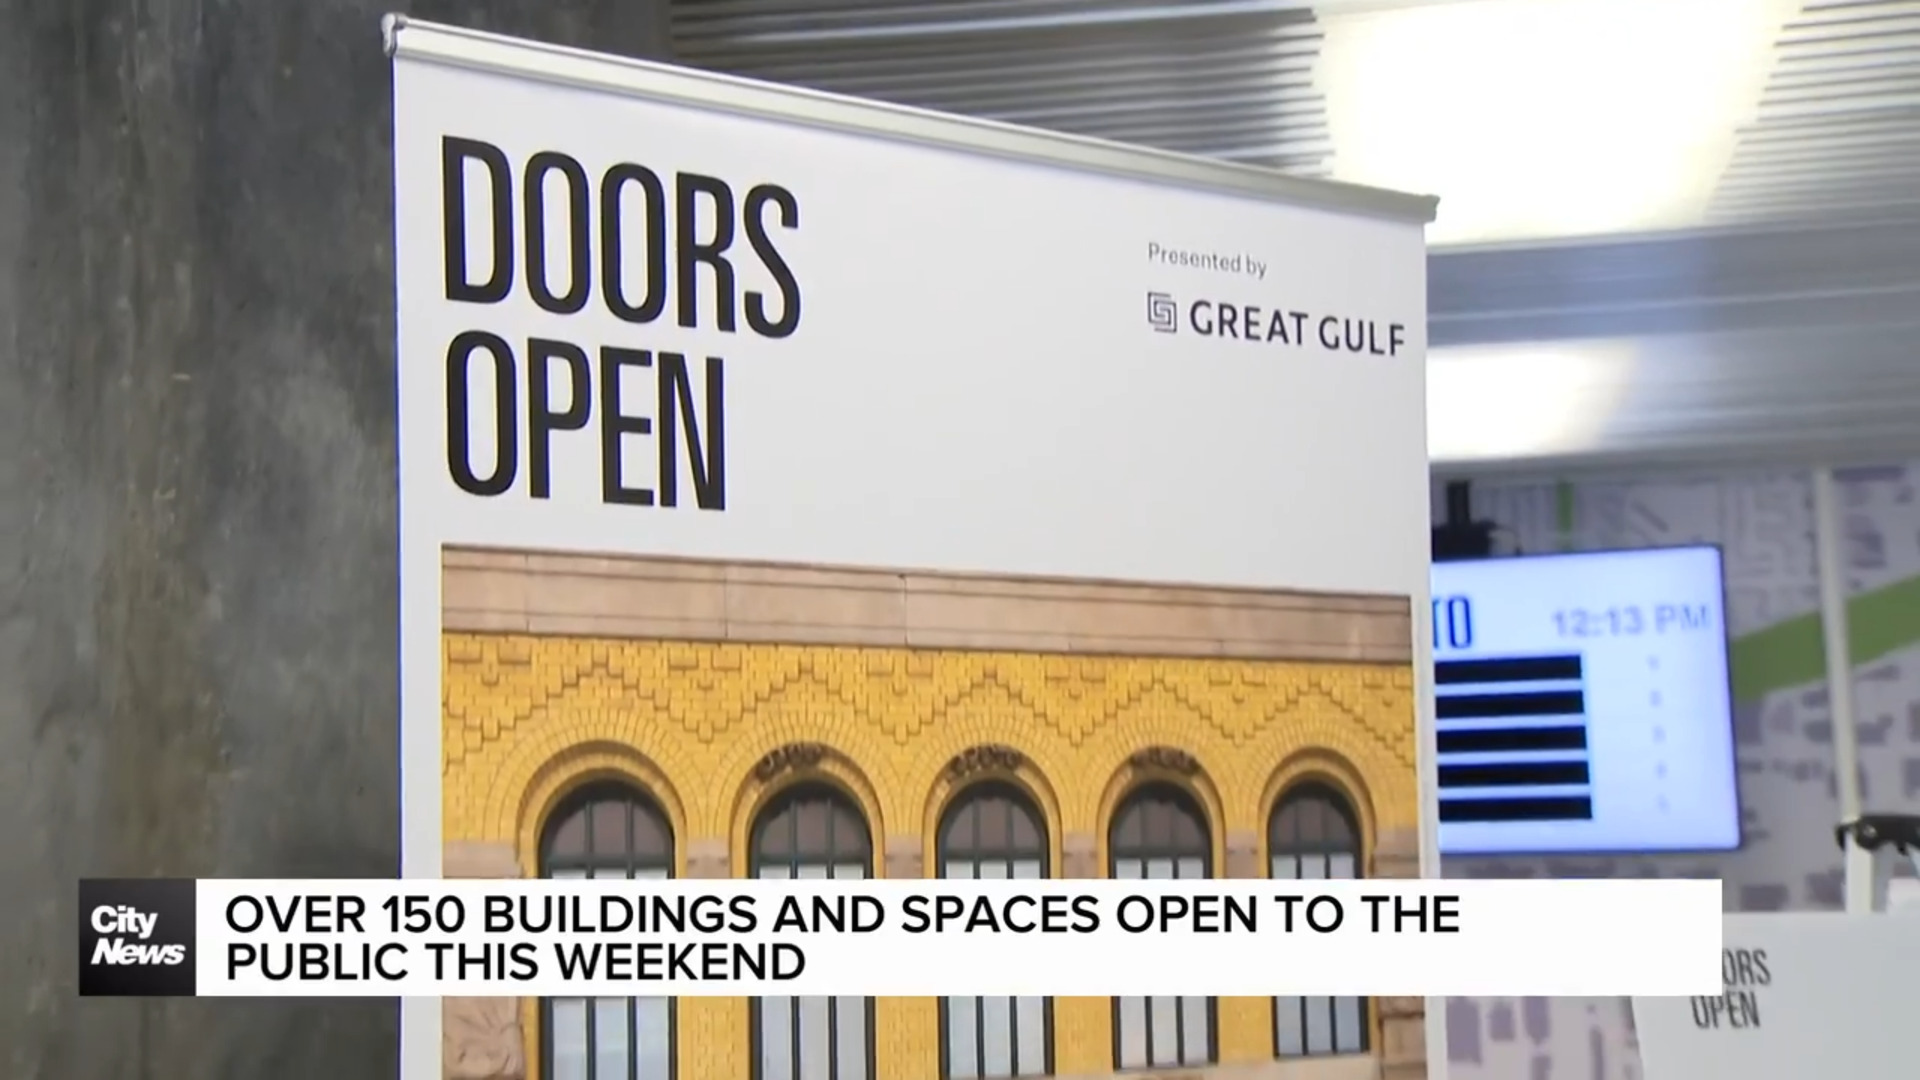 Toronto gets ready to open its doors